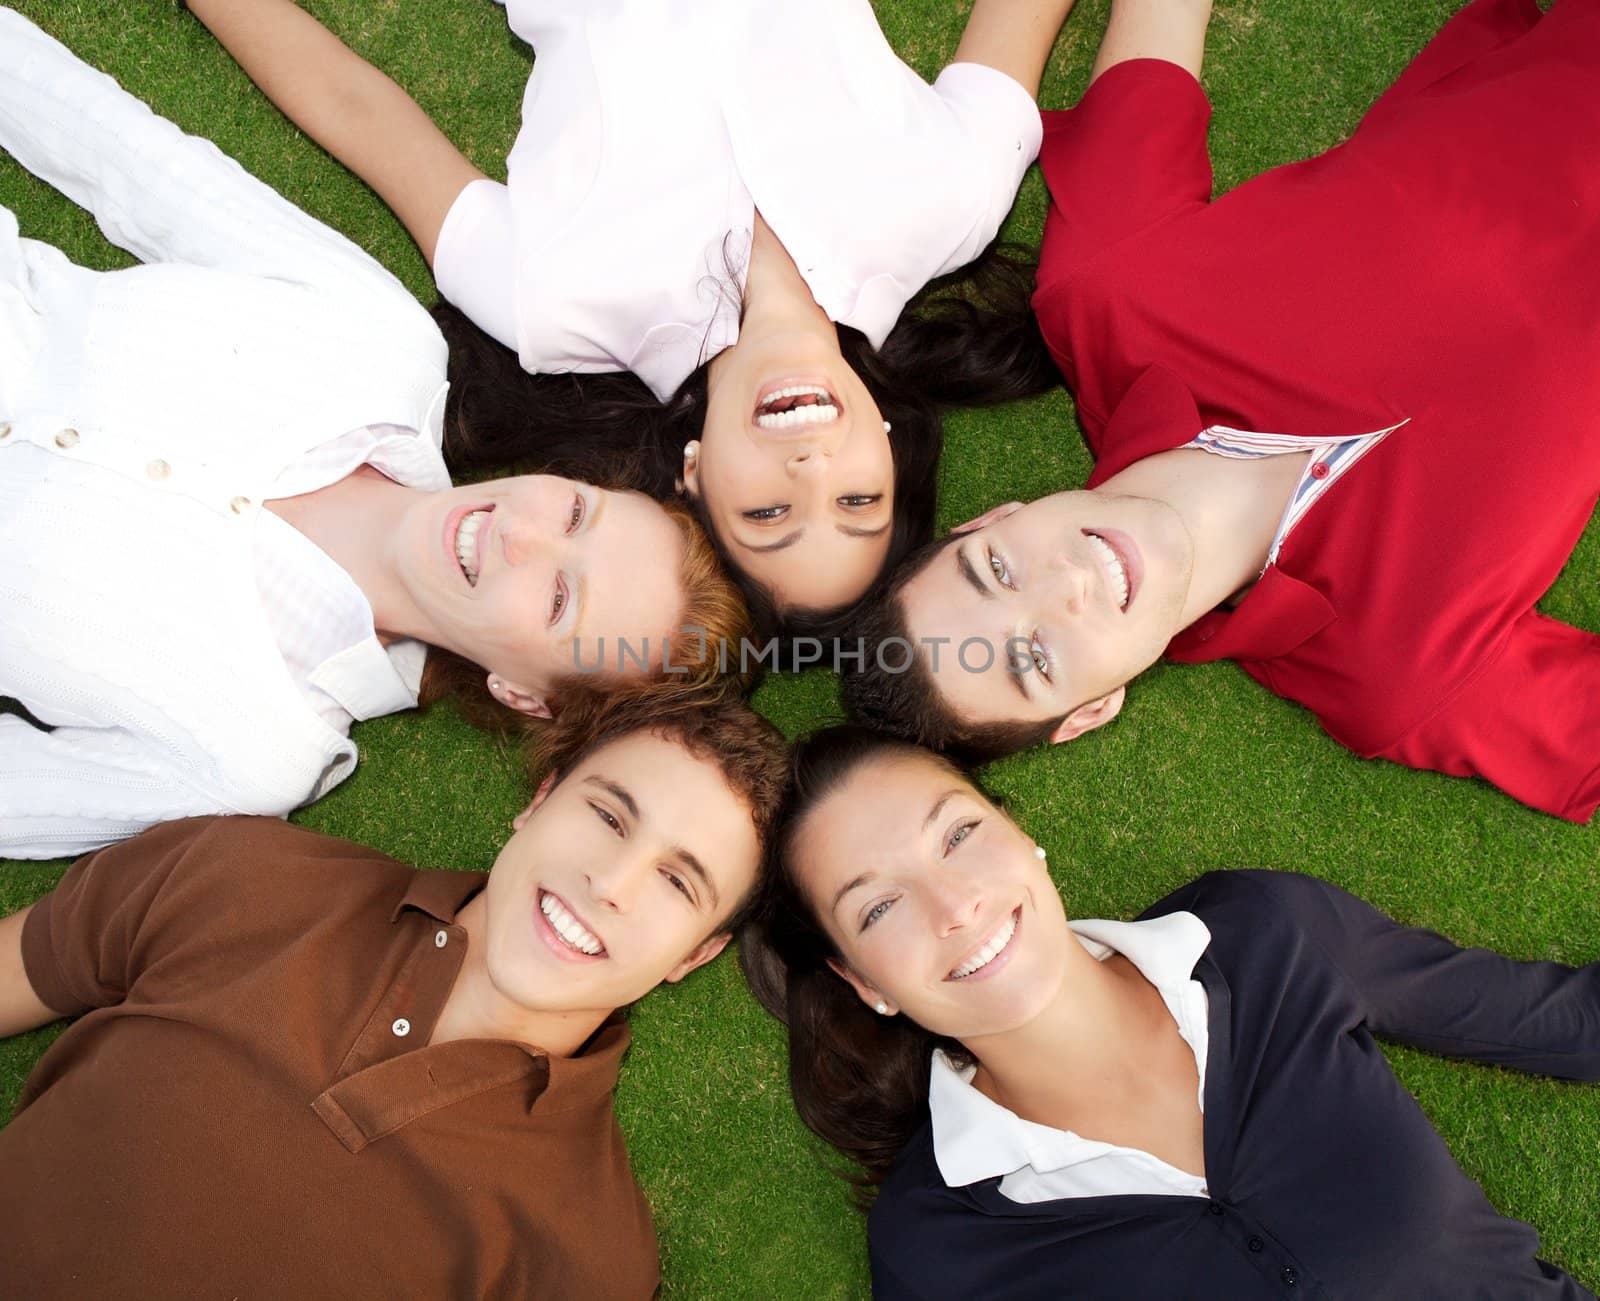 friends happy group in circle together on grass by lunamarina